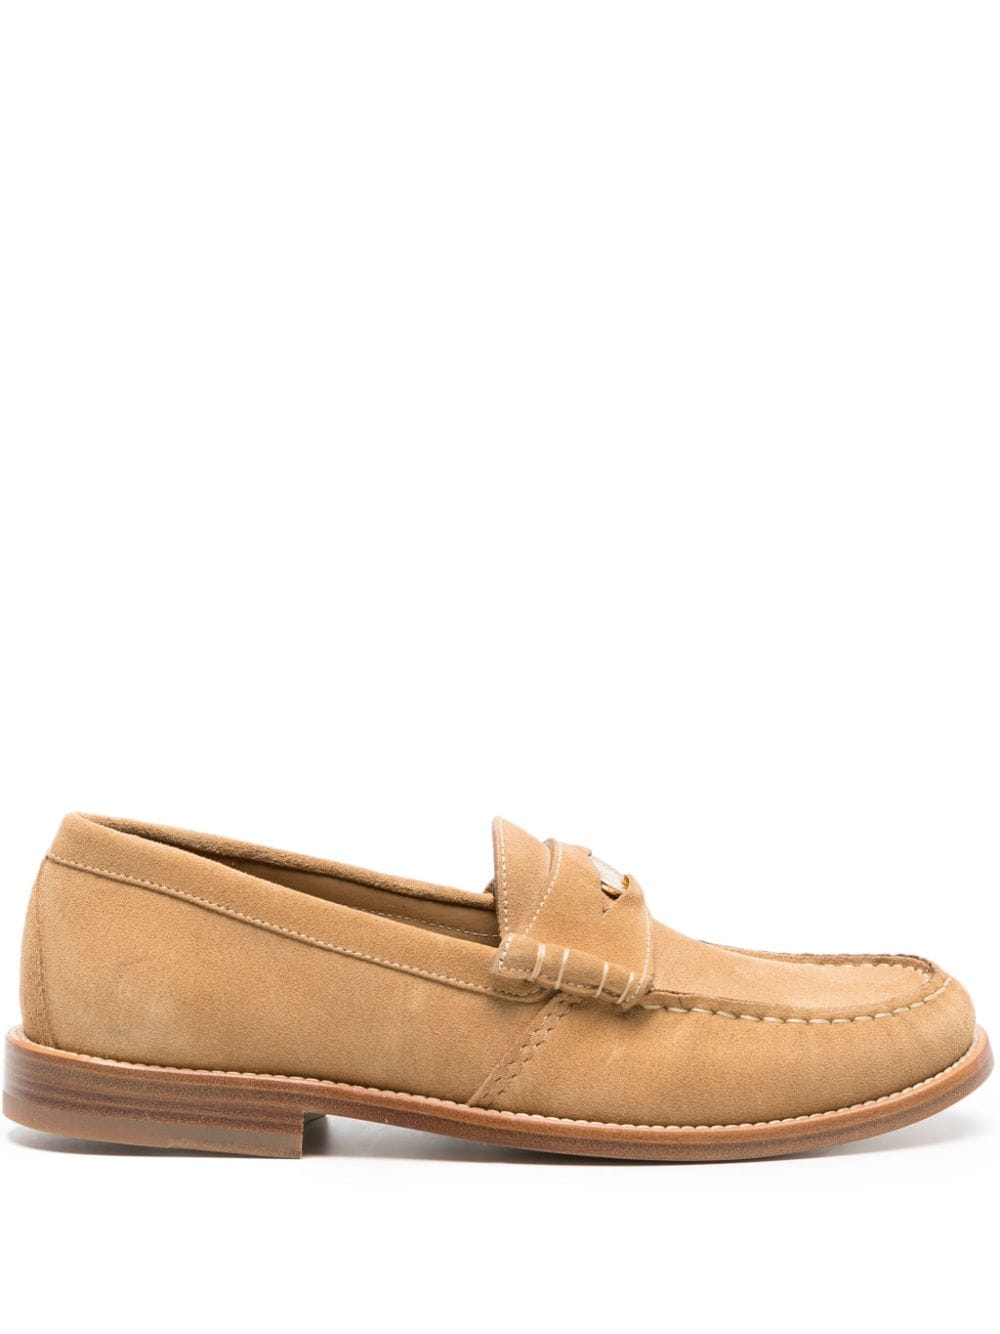 RHUDE PENNY-SLOT SUEDE LOAFERS